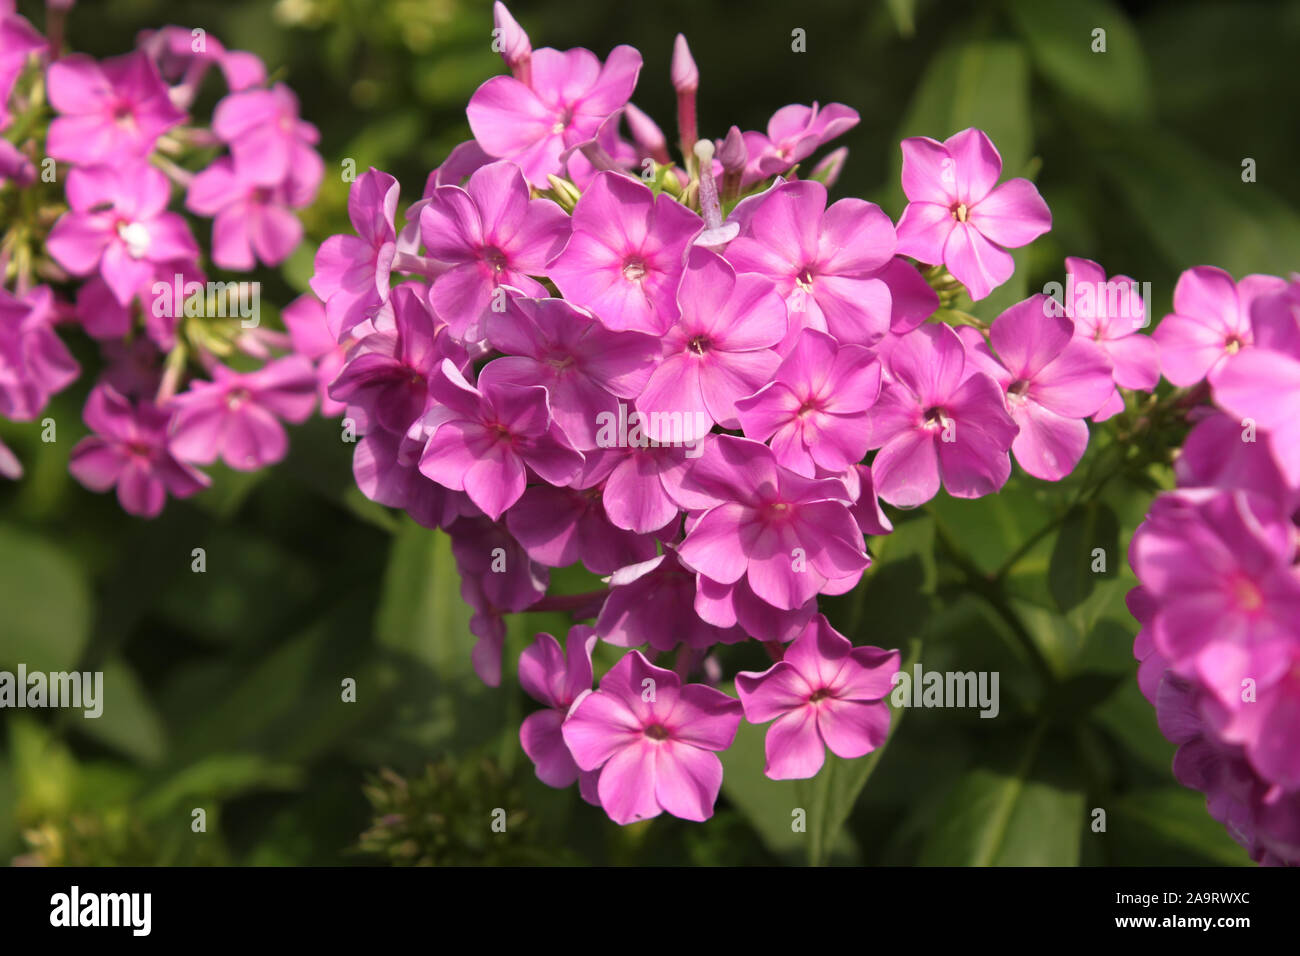 Purple phlox blooming on flowerbed in a lovely sunny day, close-up Stock Photo